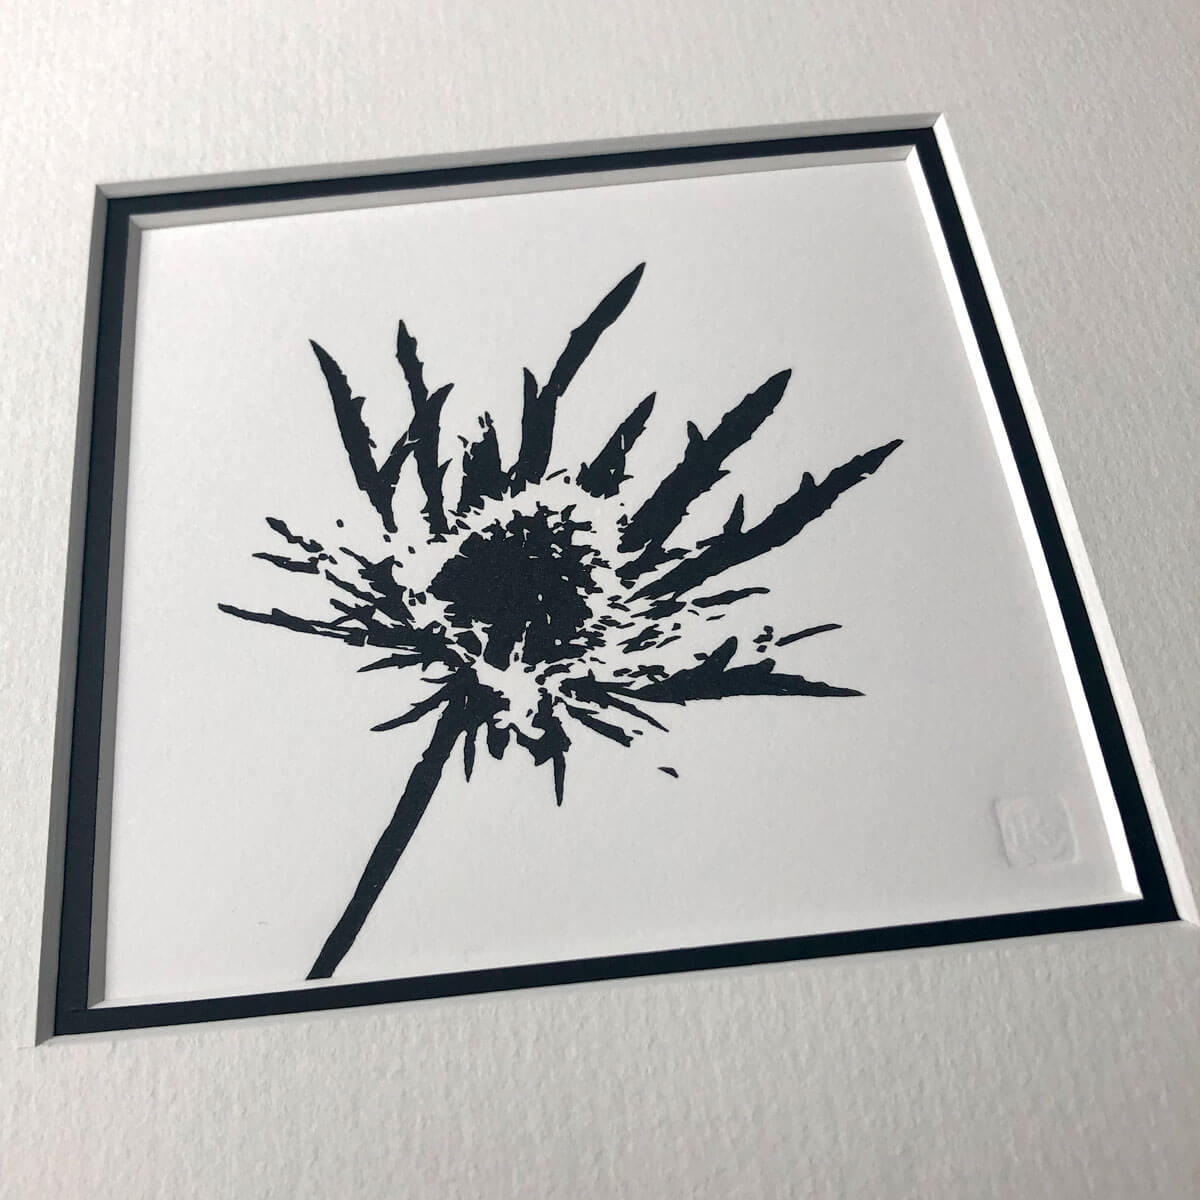 handmade woodblock print of a sea holly flowerhead in pure black against plain pale background